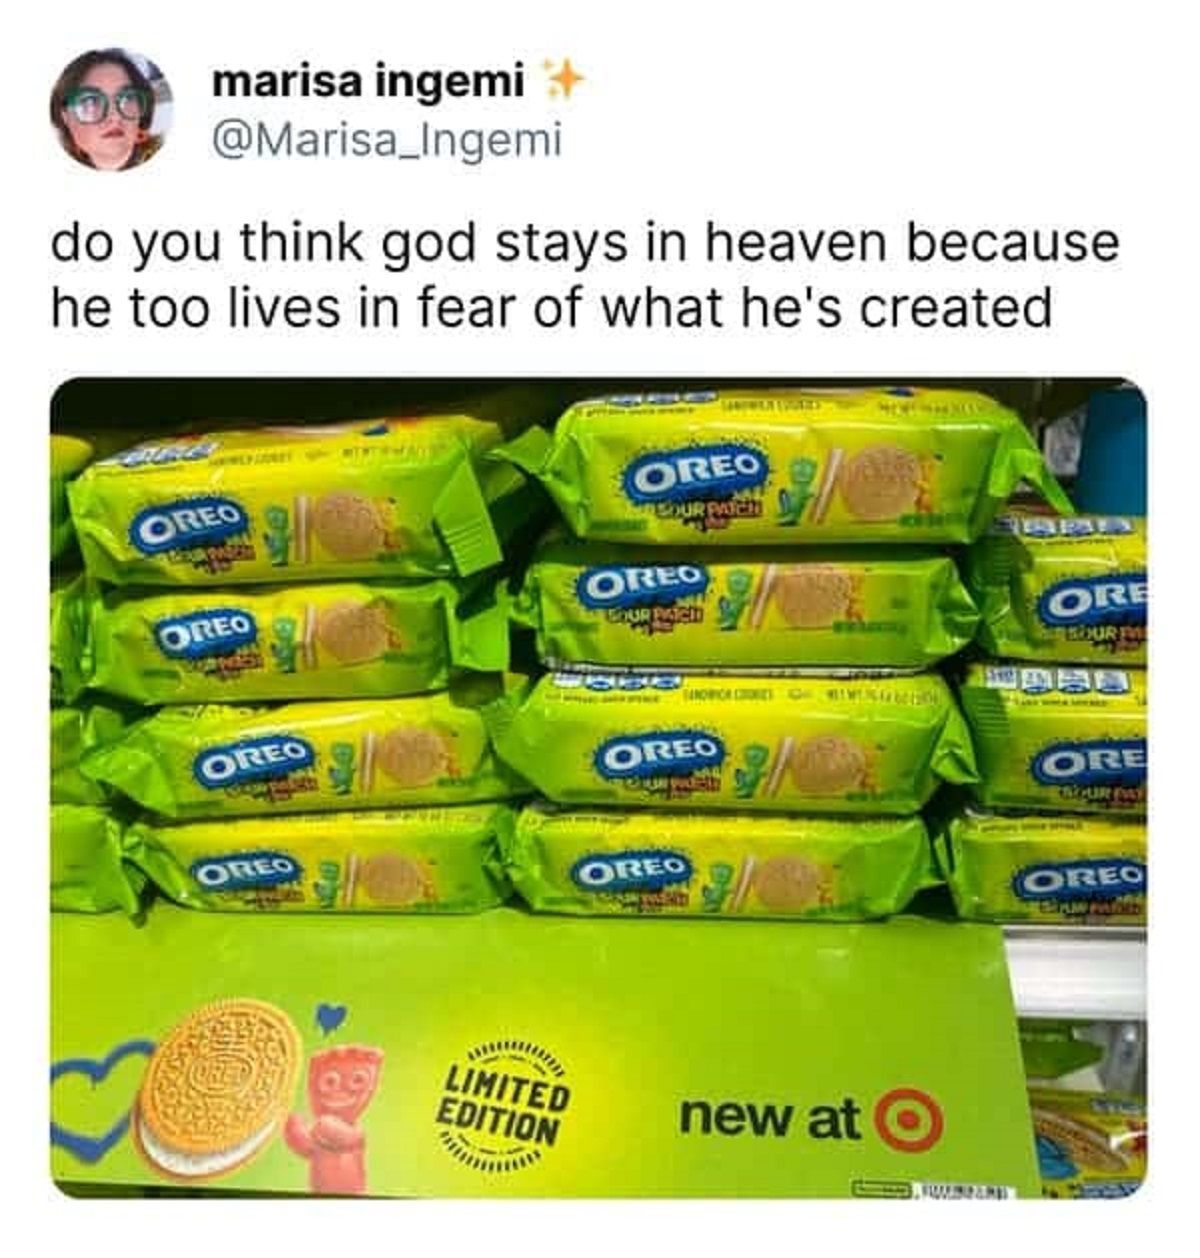 gelatin - marisa ingemi do you think god stays in heaven because he too lives in fear of what he's created Oreo Oreo Oreo Our Patch Oreo Your Patchd Oreo Oreo Oreo Angenter Ore Soure Ore Our Way Oreo Oreo Limited Edition new at O